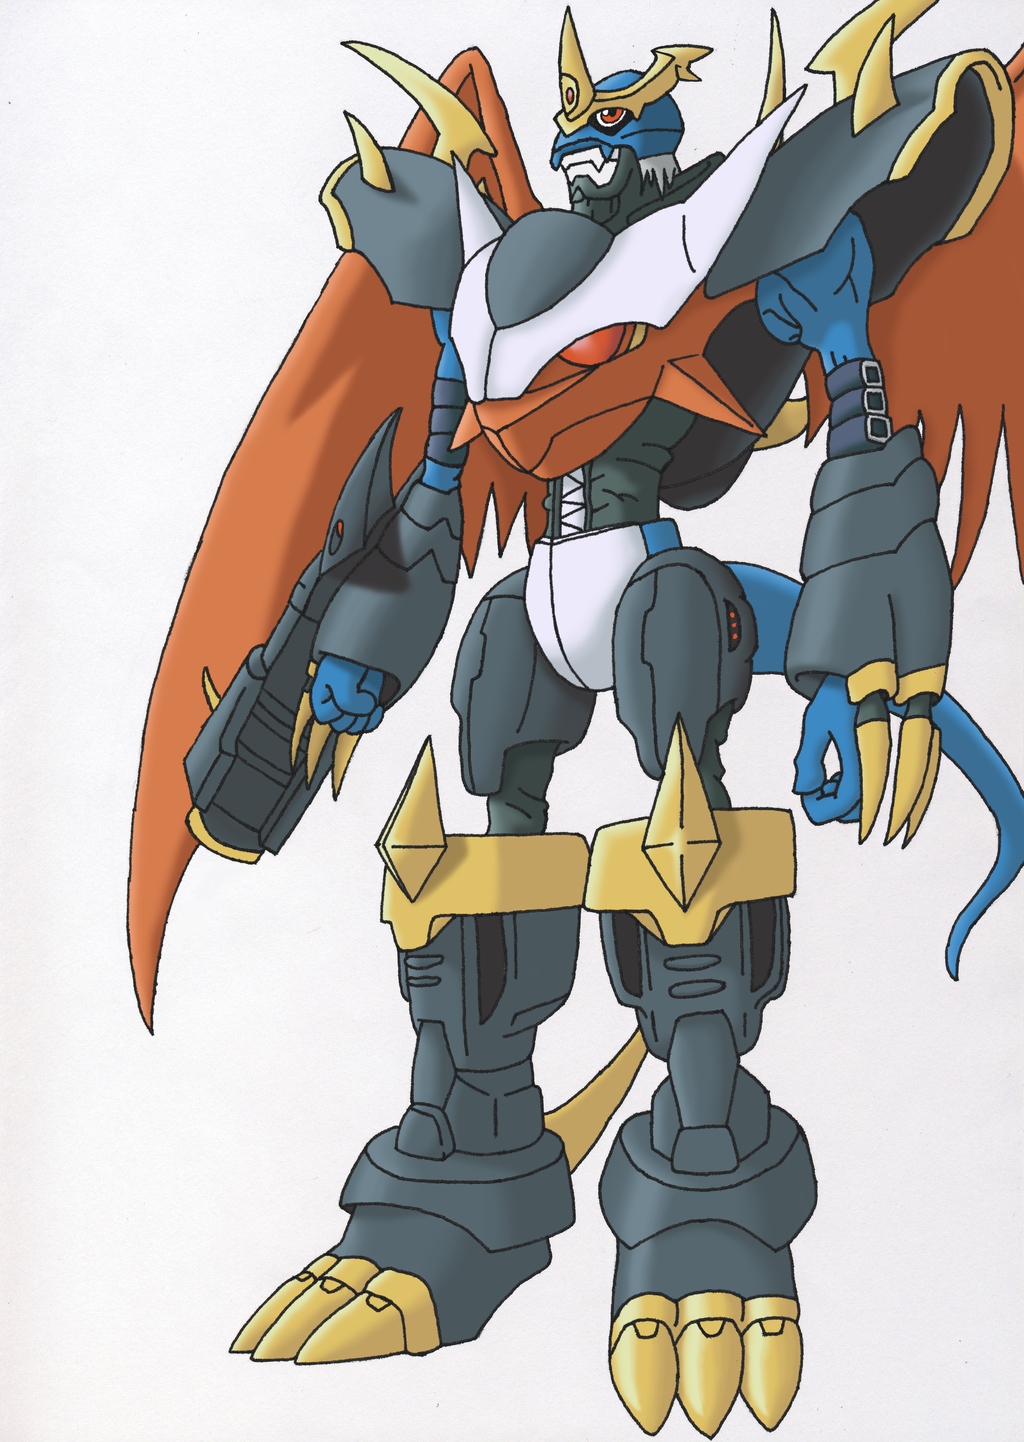 Imperialdramon - Fighter Mode by Siques on DeviantArt